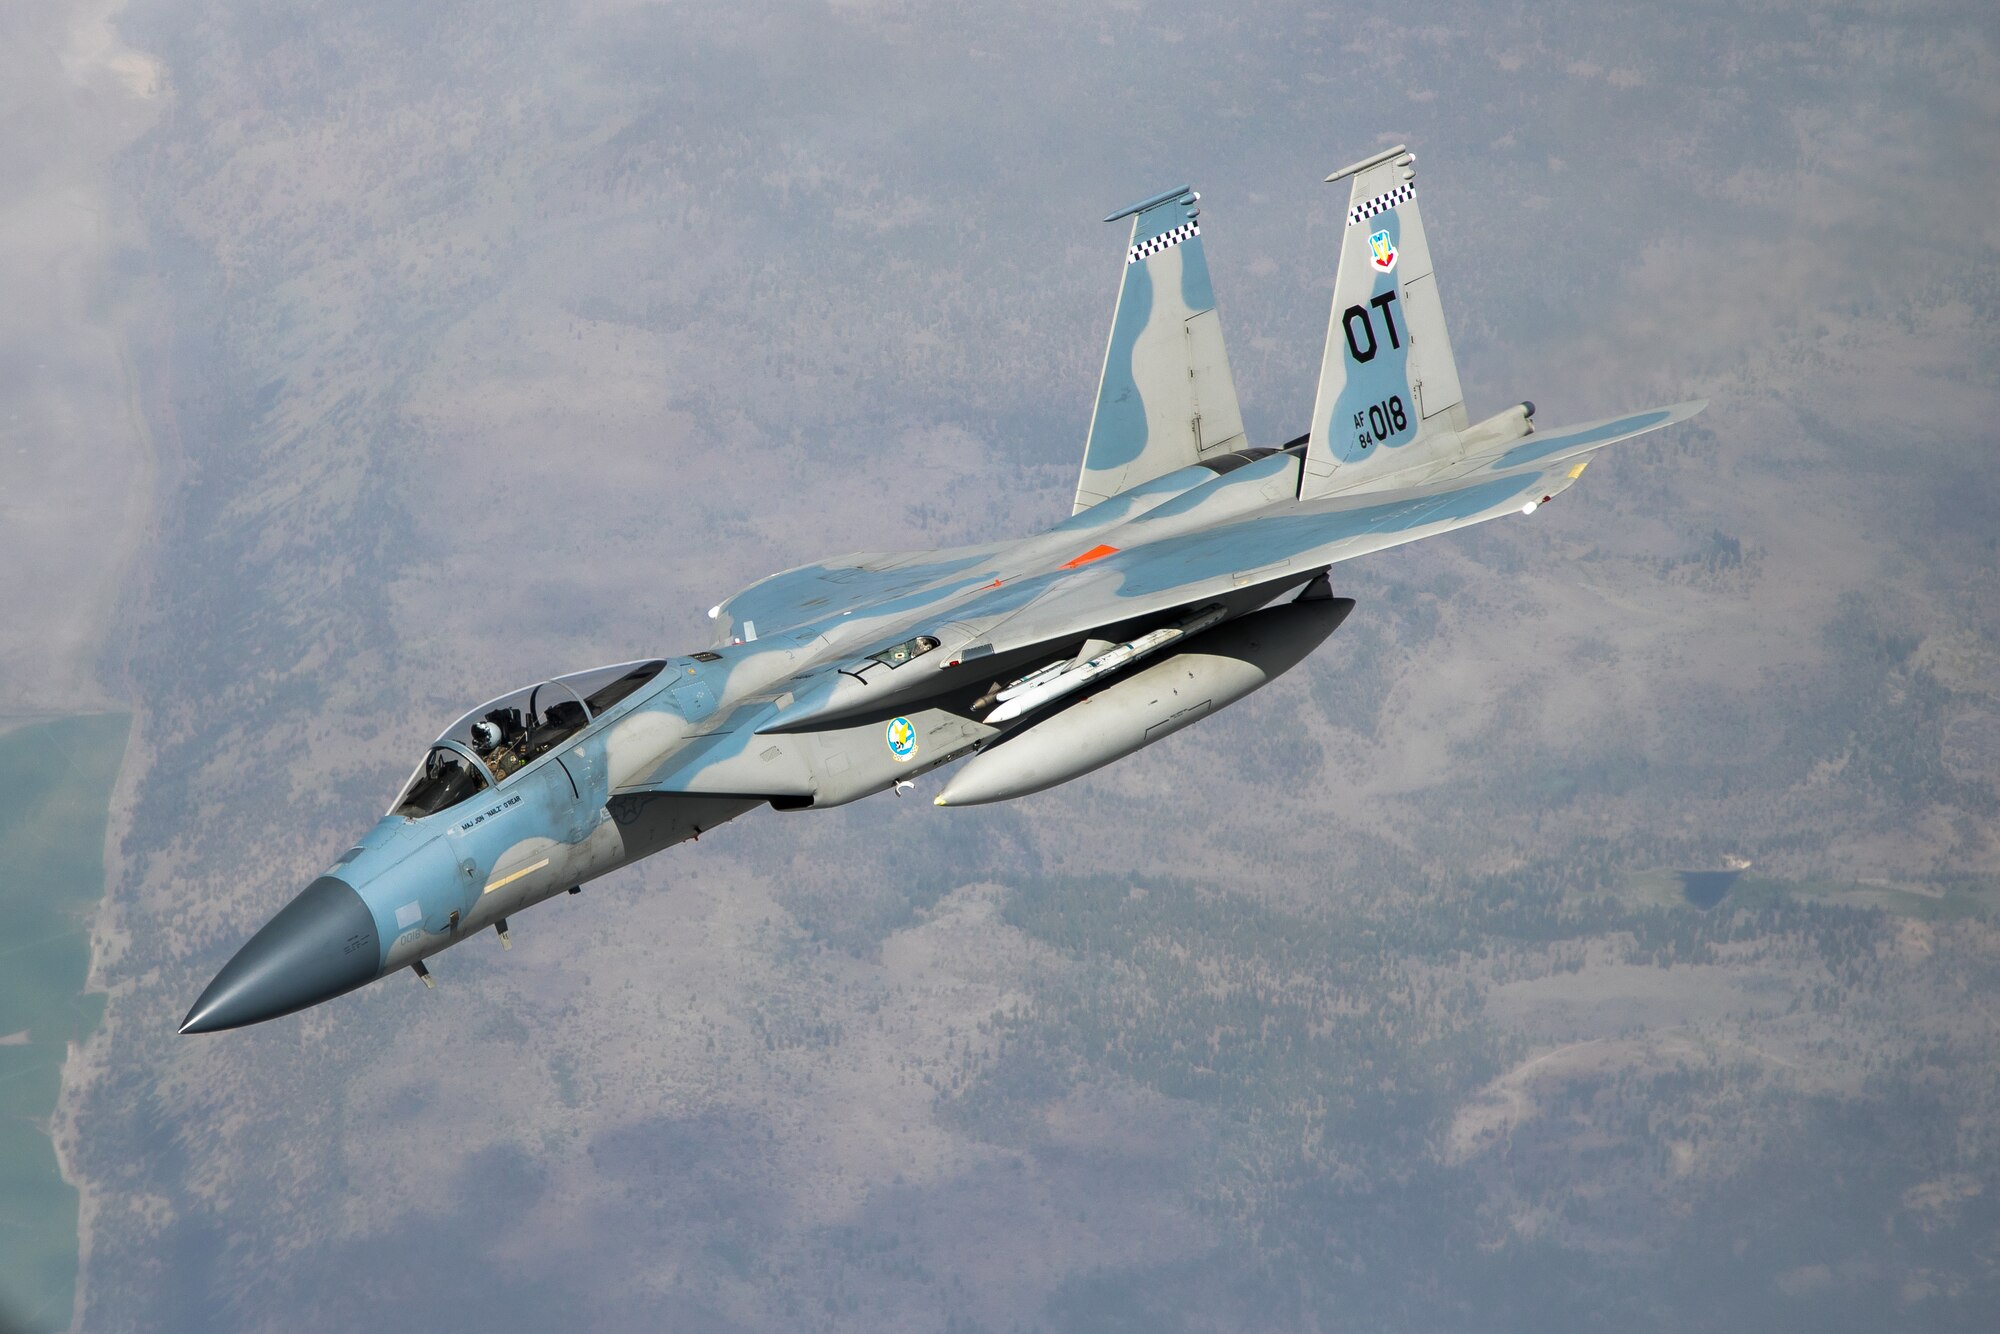 An F-15 from the 85th Test and Evaluation Squadron, 53rd Wing, out of Eglin Air Force Base, Florida, conducts aerial refueling operations above the skies of Northern California, May 14. The aircraft participated in the Northern Edge 21 exercise in Alaska earlier in May. (Air Force photo by Ethan Wagner)